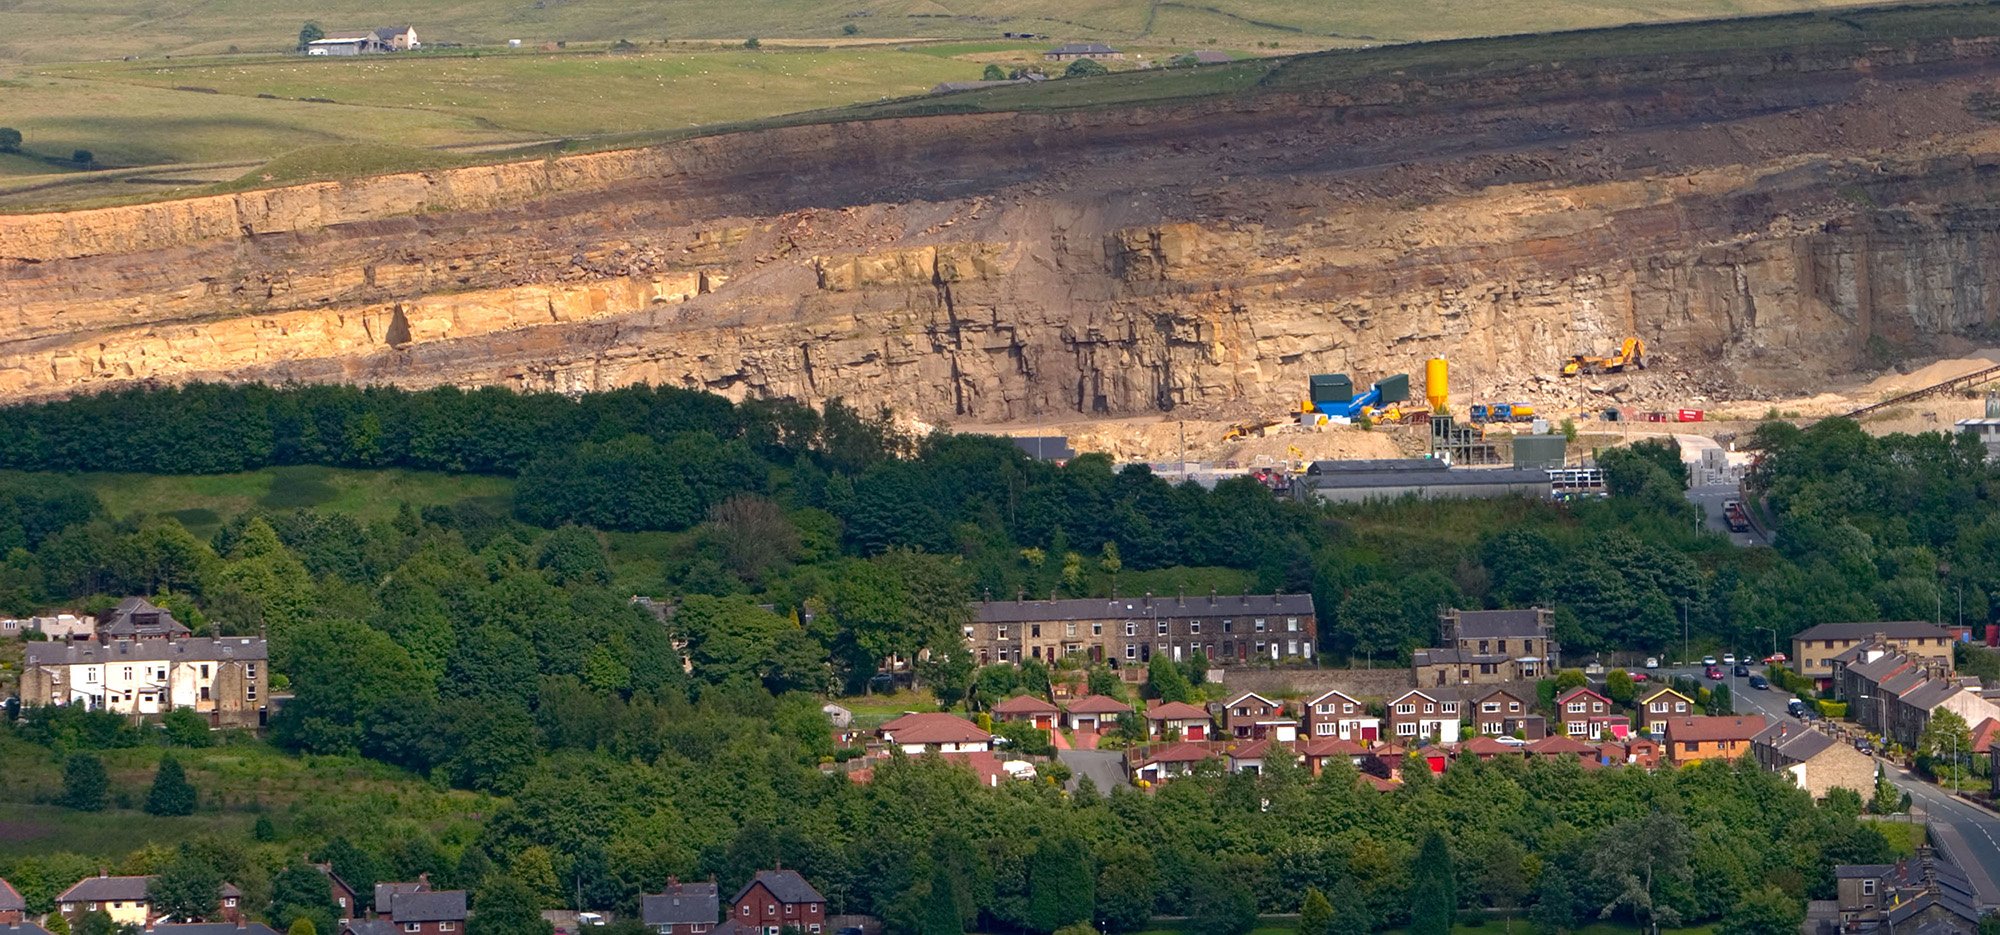 A wide view of a broad quarry face, quarry machinery, woodland and rows of houses.  